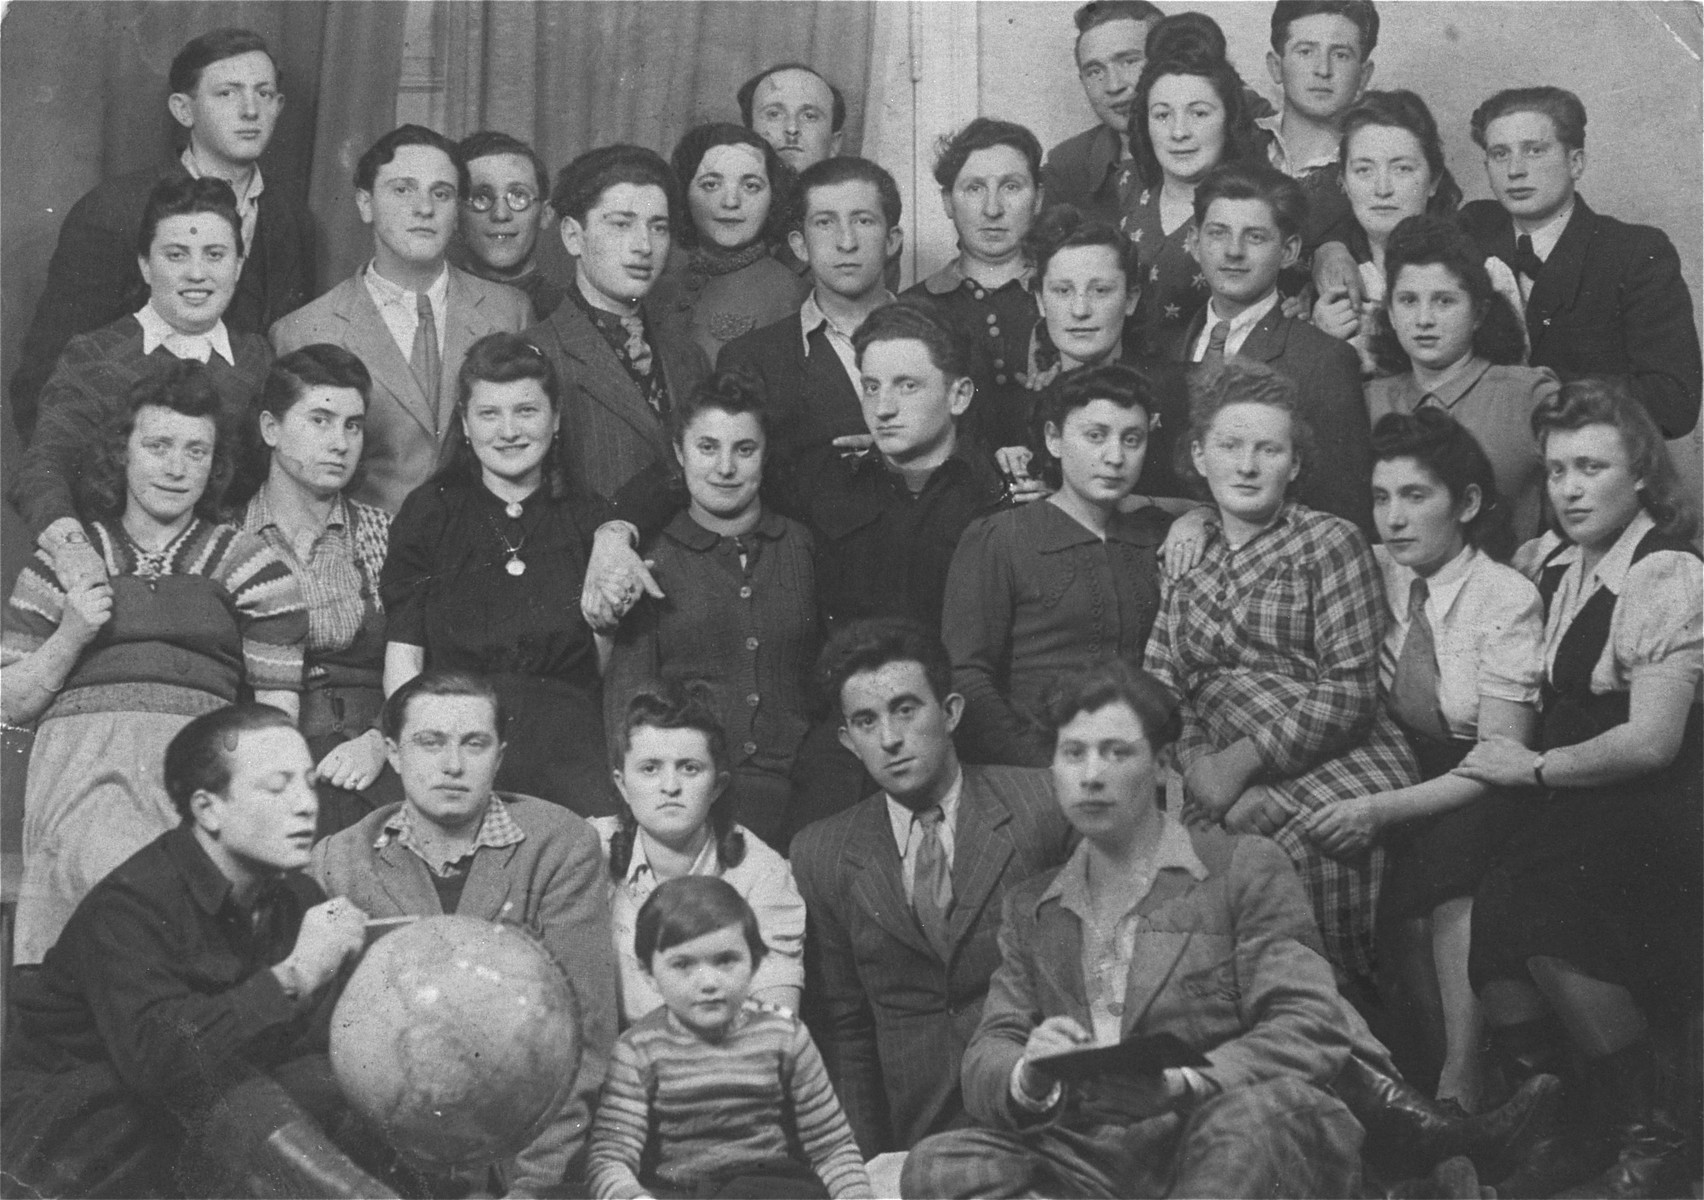 Group portrait of Jewish DPs in the Ludwigsdorf displaced persons' camp.

Among those pictured is Pinchas (Pinek) Rajzman (now Pinchas Reisman) from Sosnowiec, standing in the 3rd row, second from the right (directly behind woman in plaid dress).